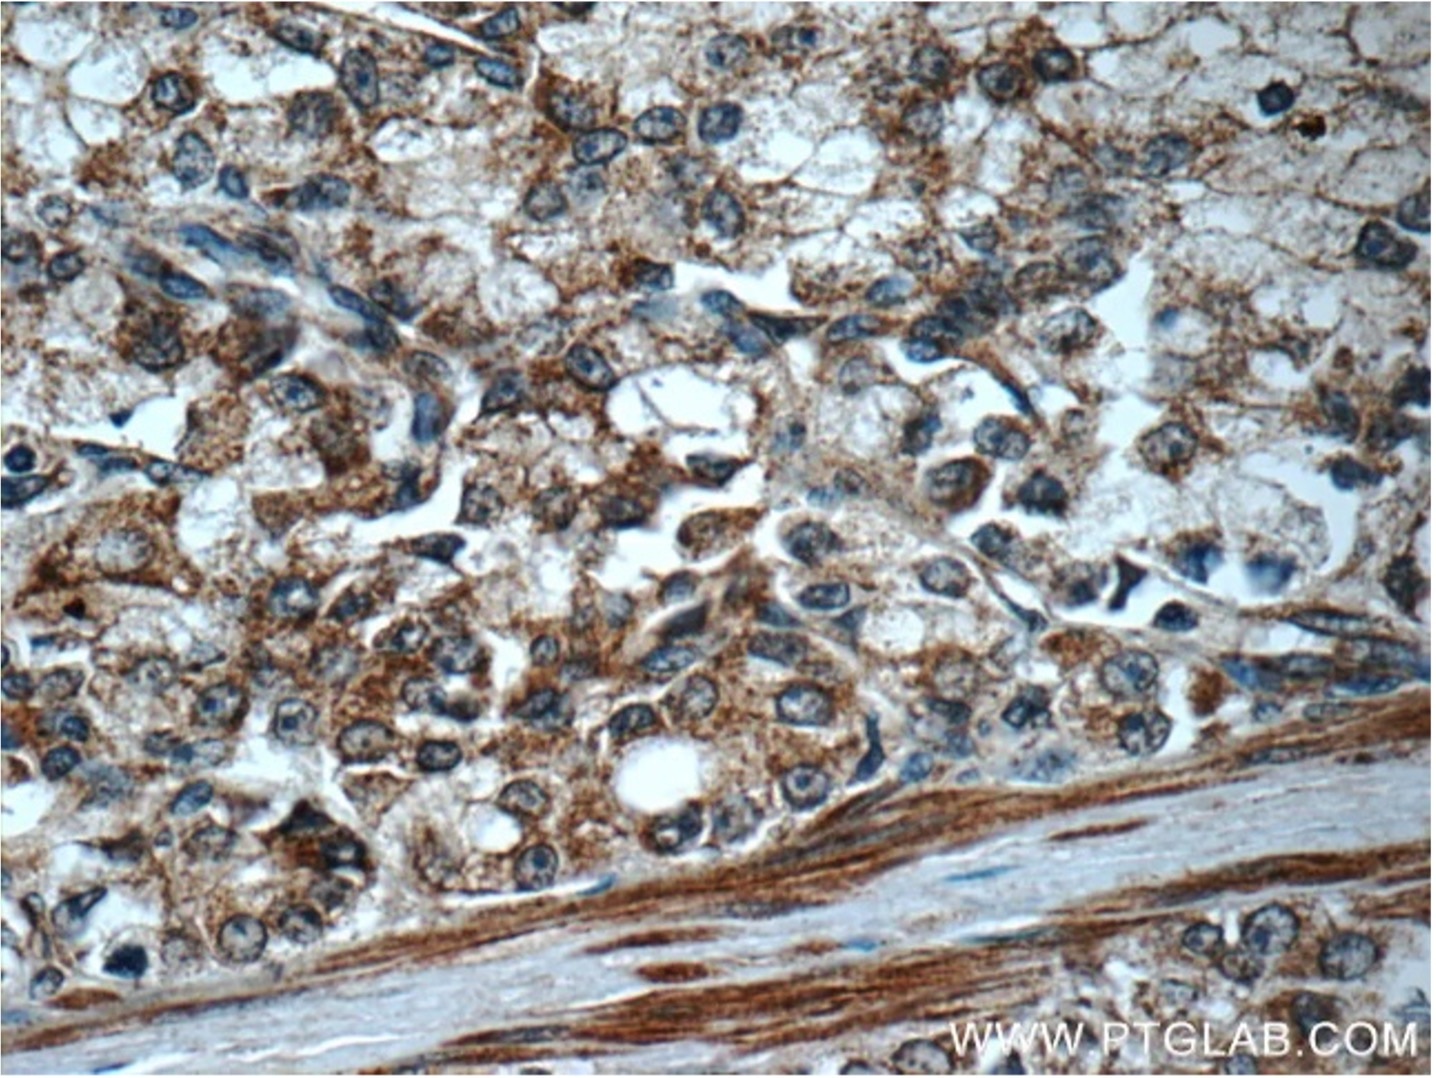 Immunohistochemistry of human prostate cancer tissue using FAS antibody from Proteintech